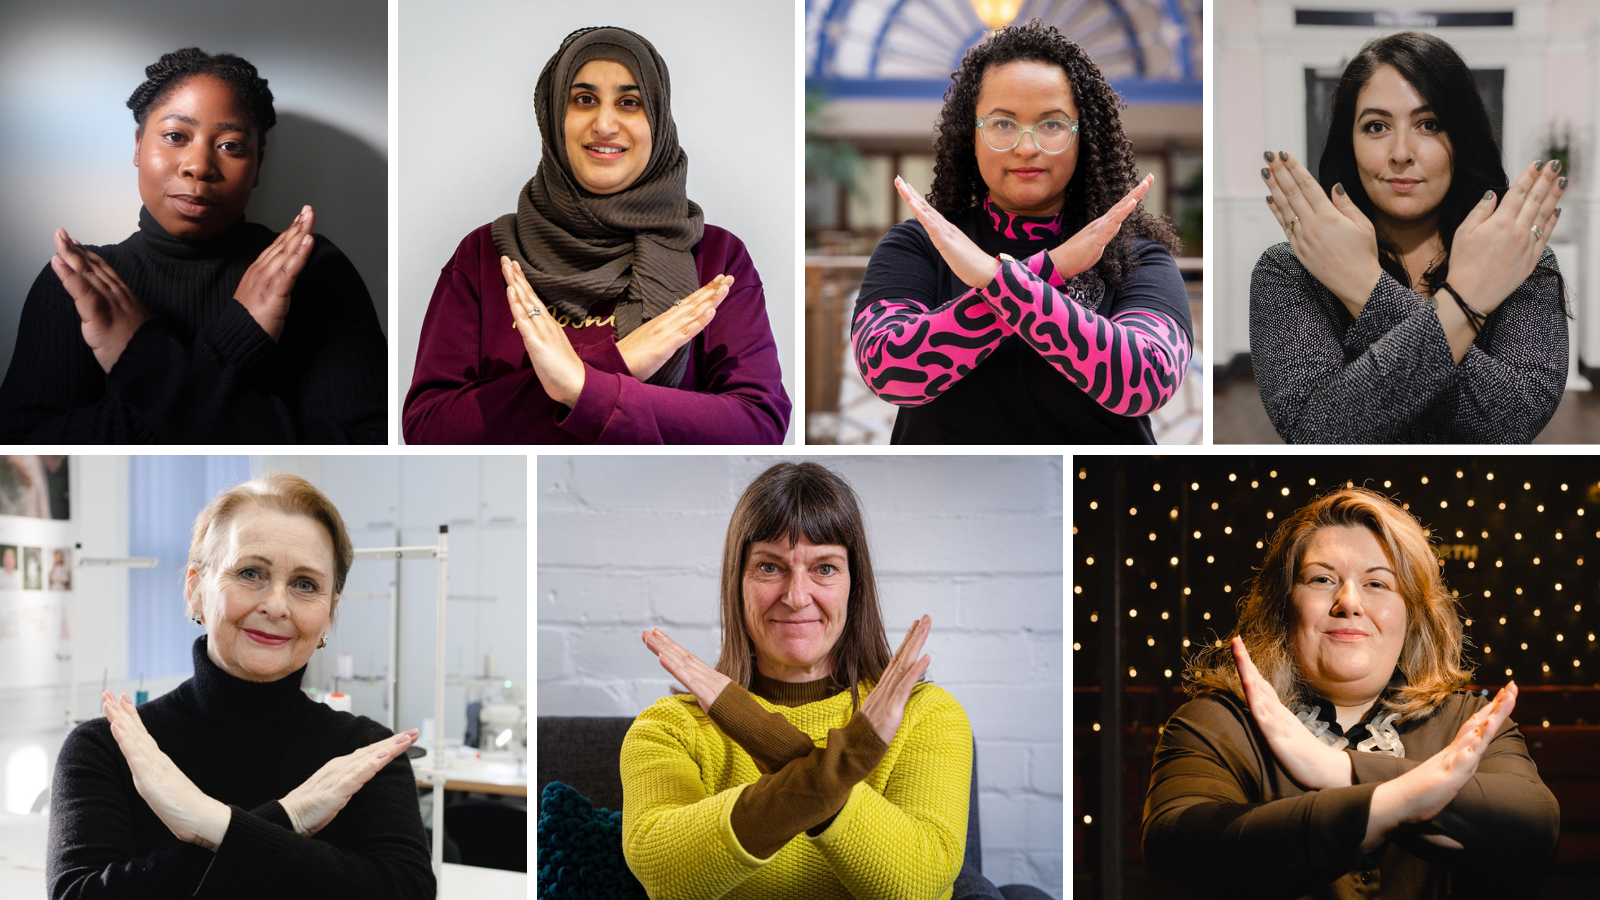 #BreaktheBias Portrait Images by Christina Davies and Rachel Ovenden for International Women's Day.